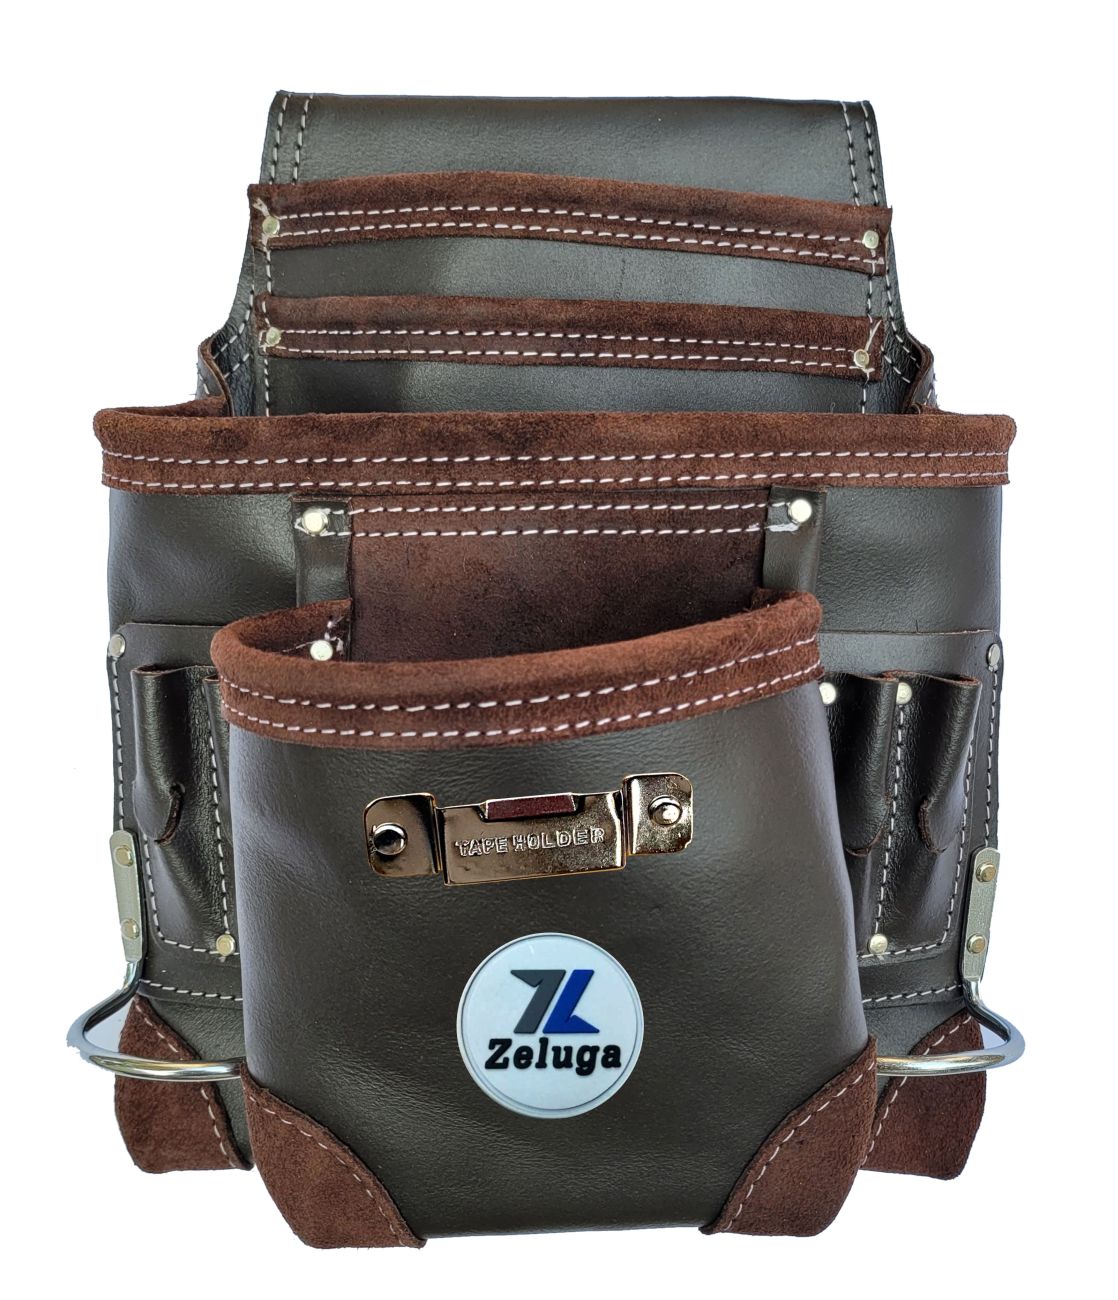 ZL111TB 10 Pocket Rigger Heavy Duty Leather Tool Bag, Oil Tanned